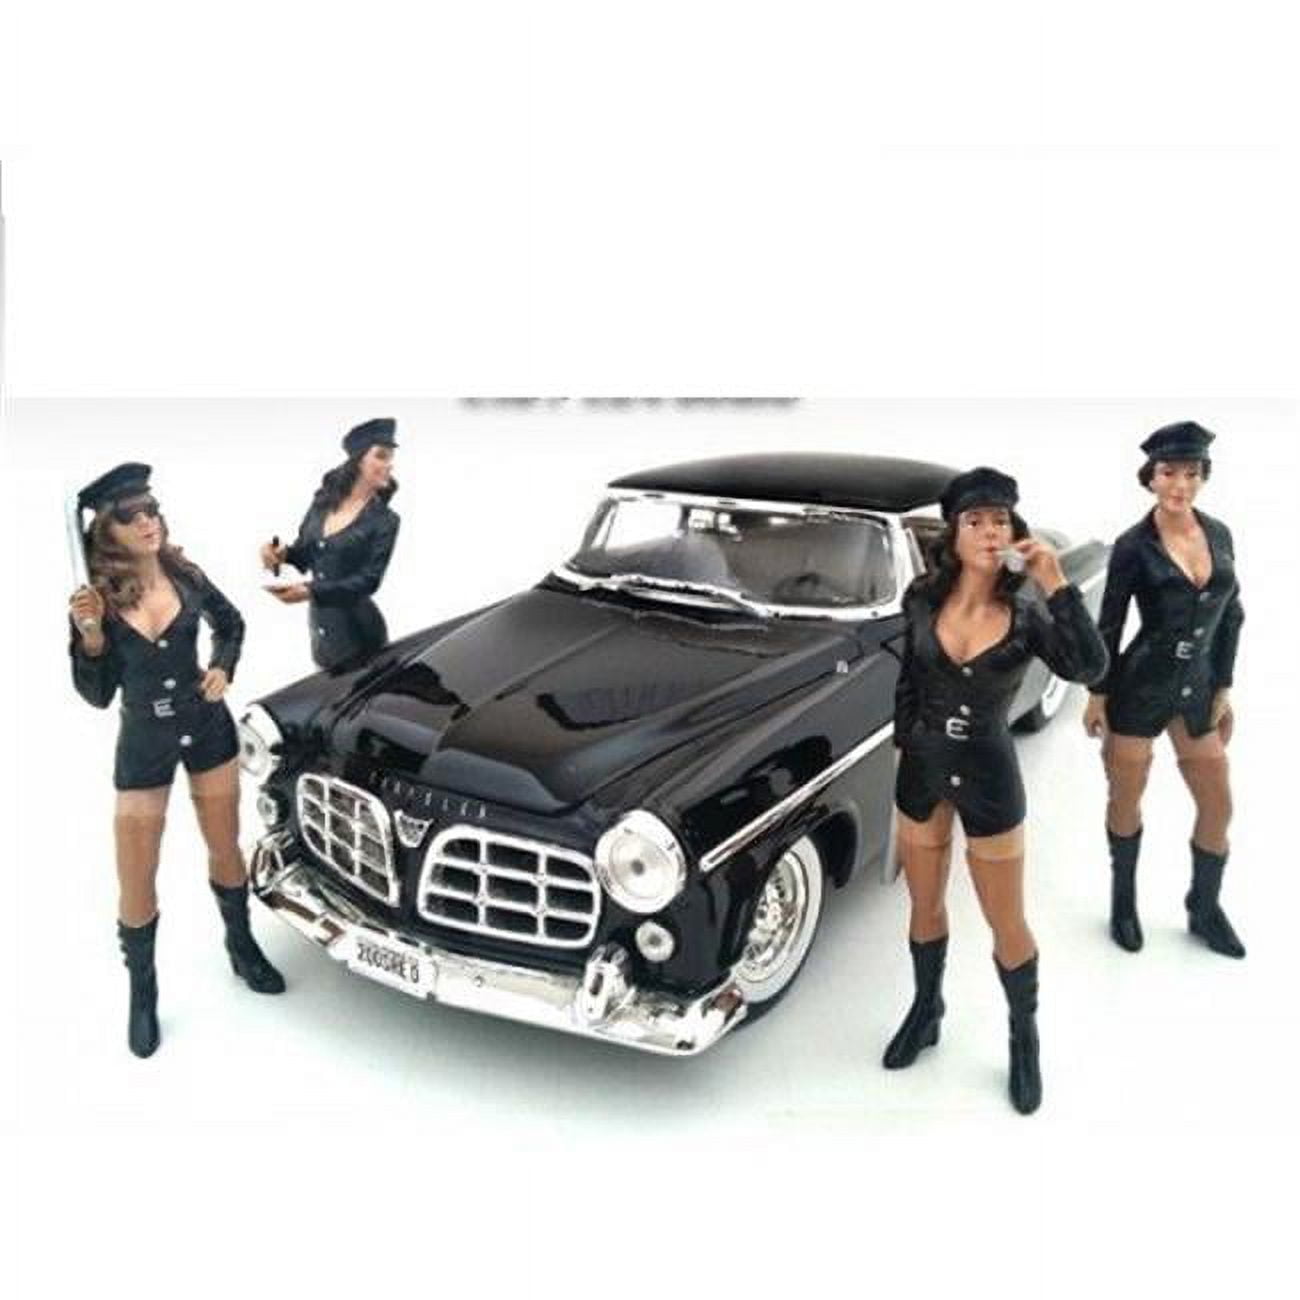 Costume Babes Figure Set For 1-24 Scale Models, 4 Piece